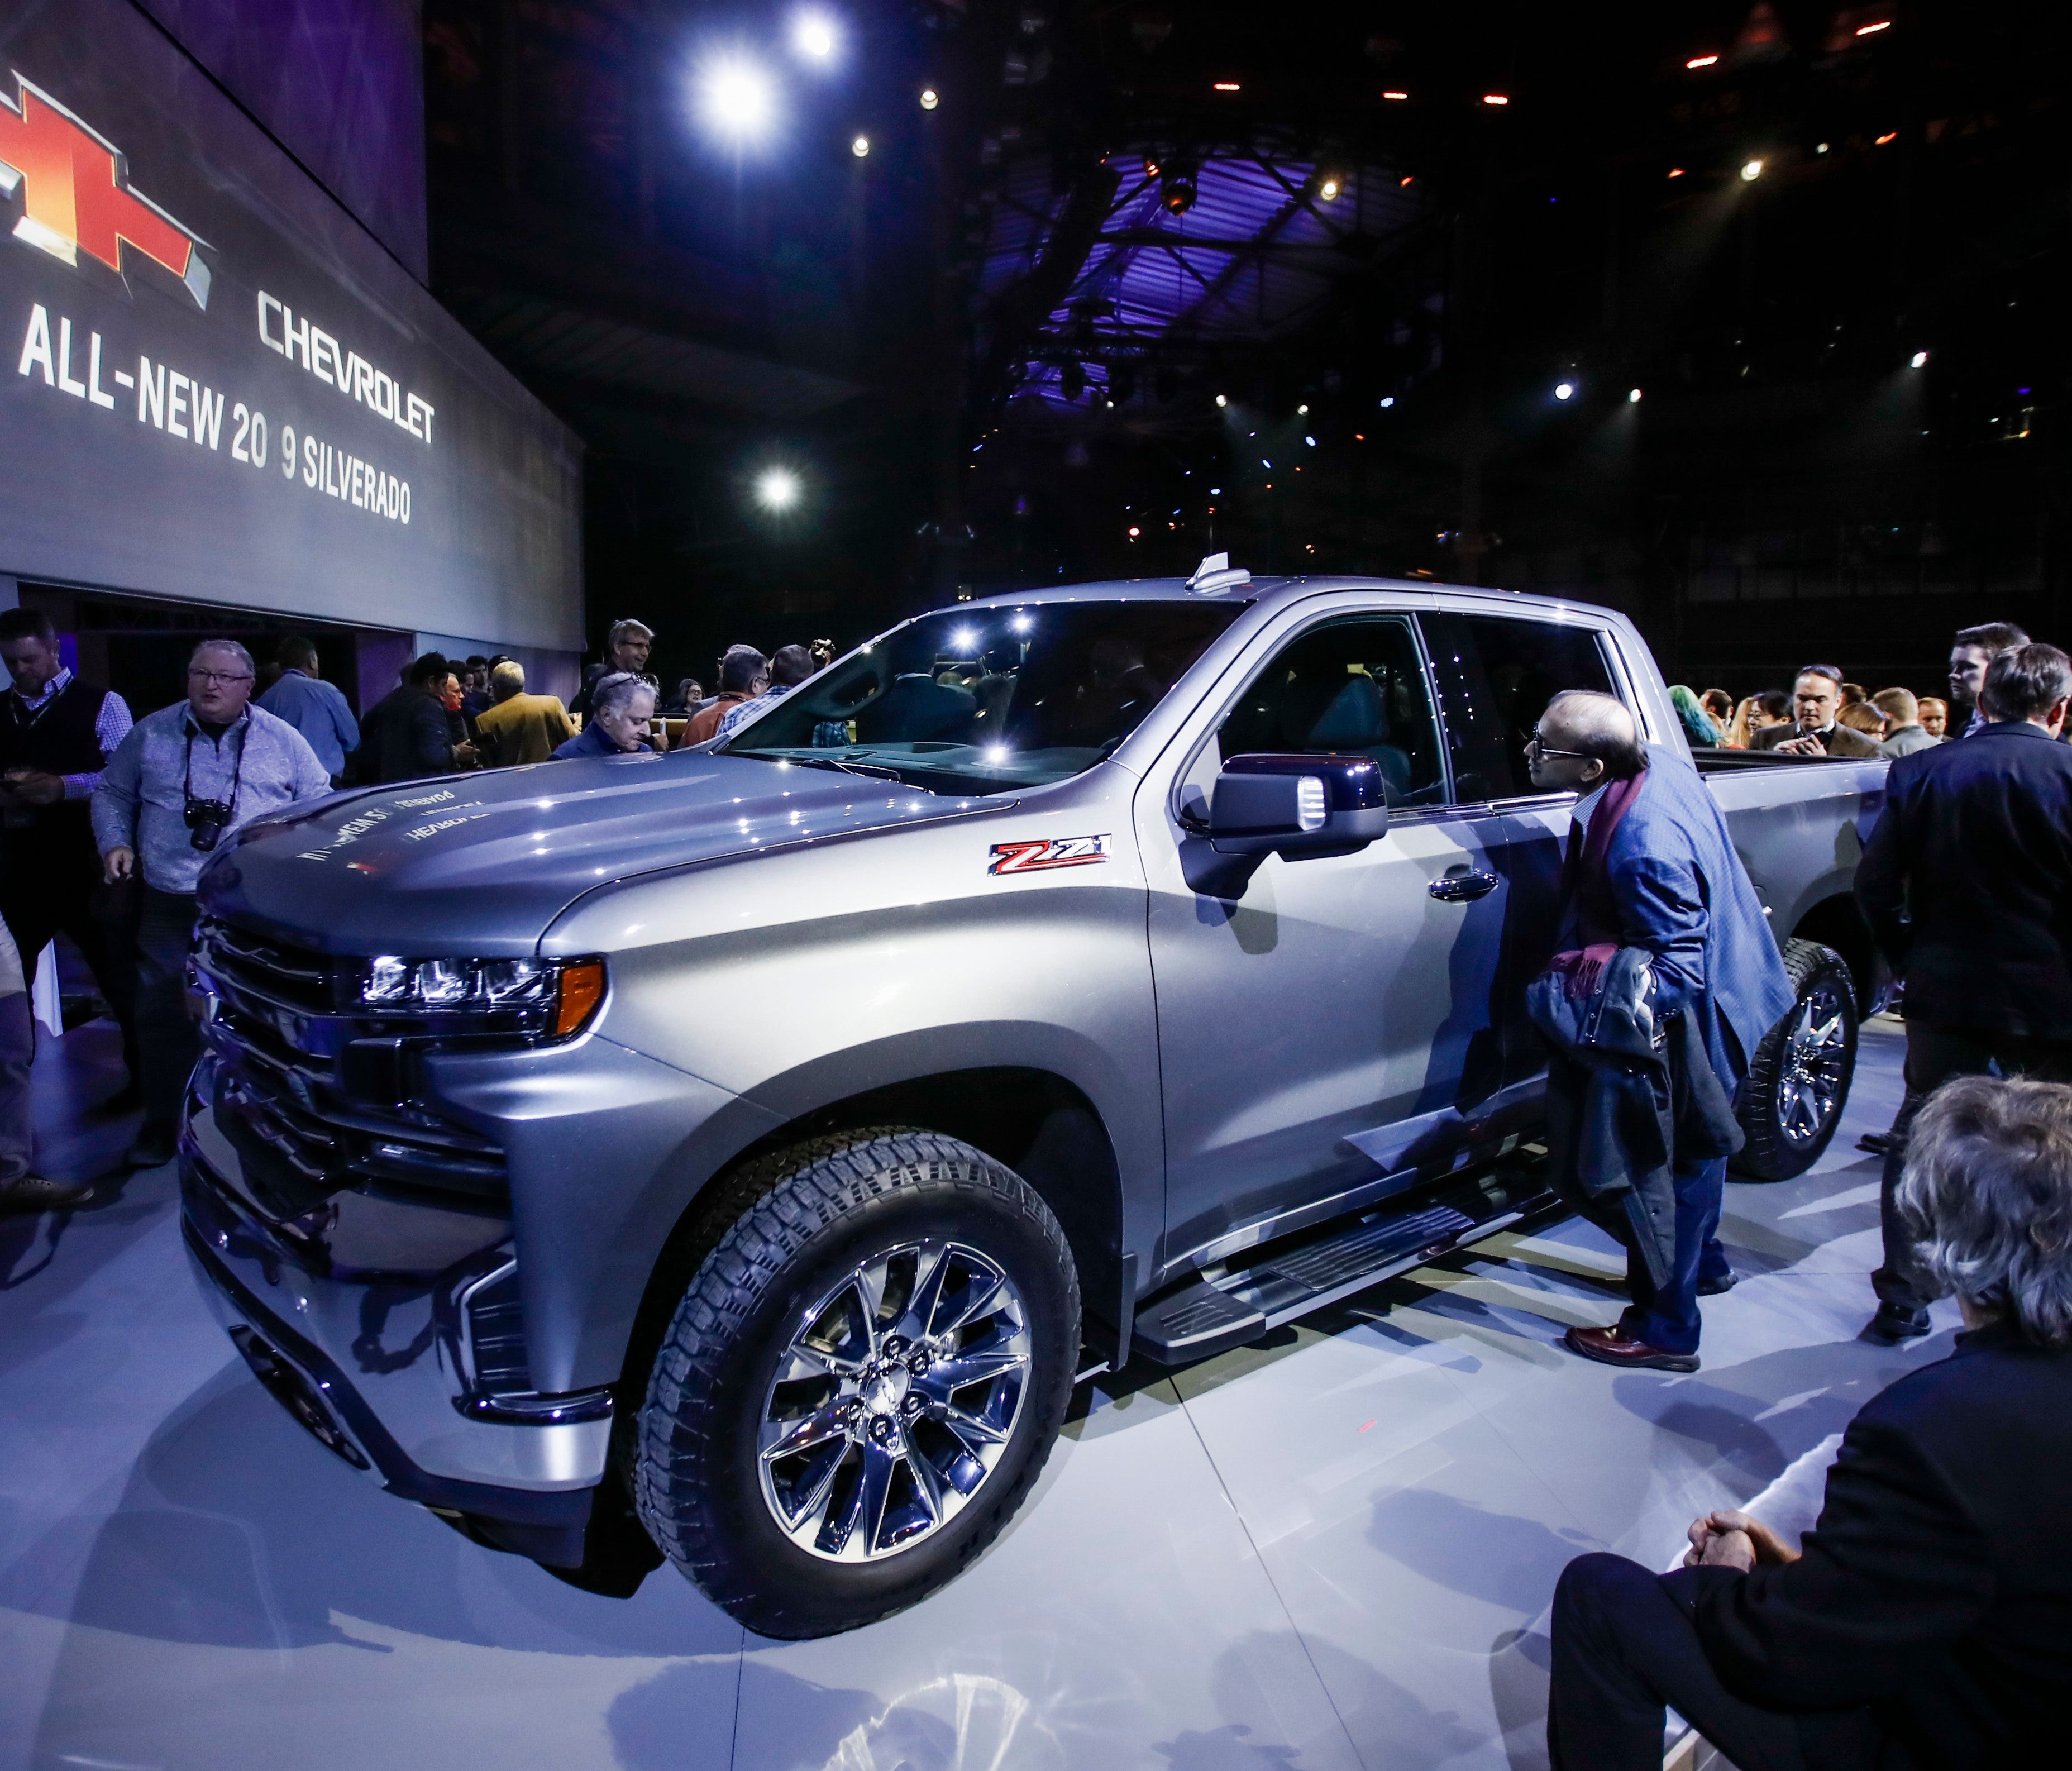 Media and guests attend a special presentation of the 2018 Chevrolet Silverado pickup truck as part of the media preview at the 2018 North American International Auto Show in Detroit, Michigan on Jan. 13, 2018. The automobile show opens to the public